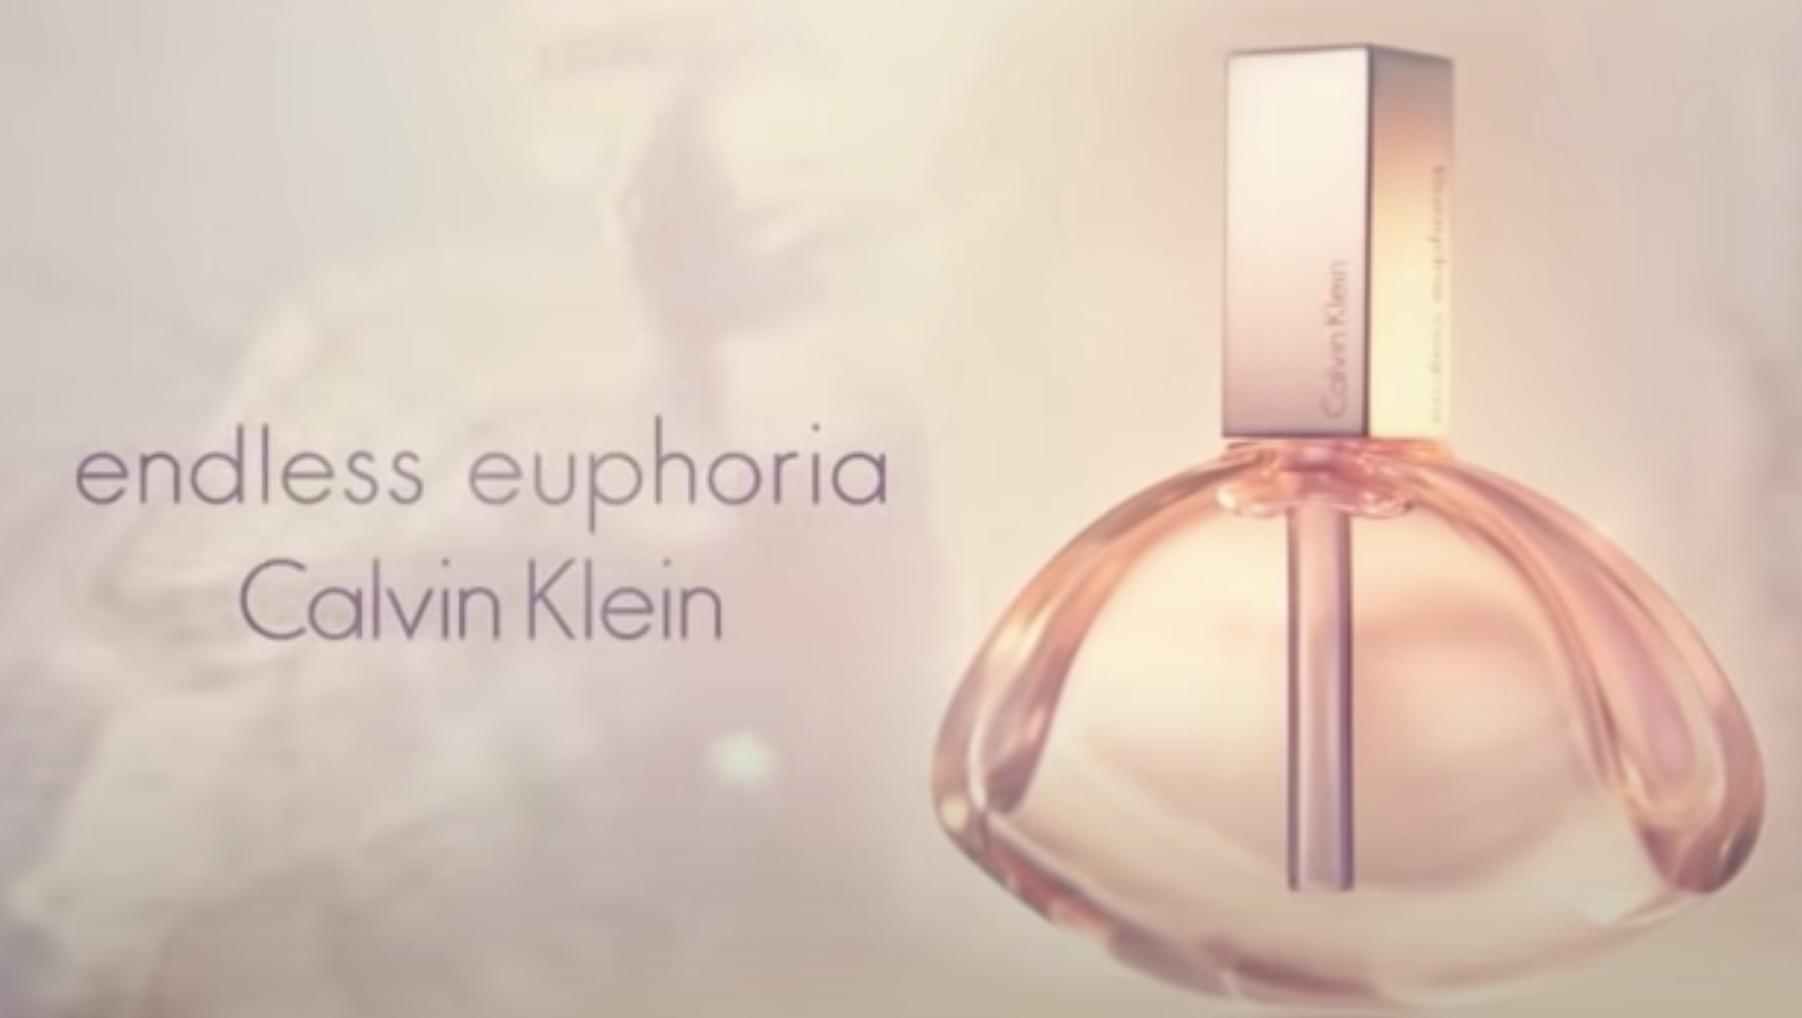 Calvin Klein's Endless Euphoria Review - Is This Worth It?